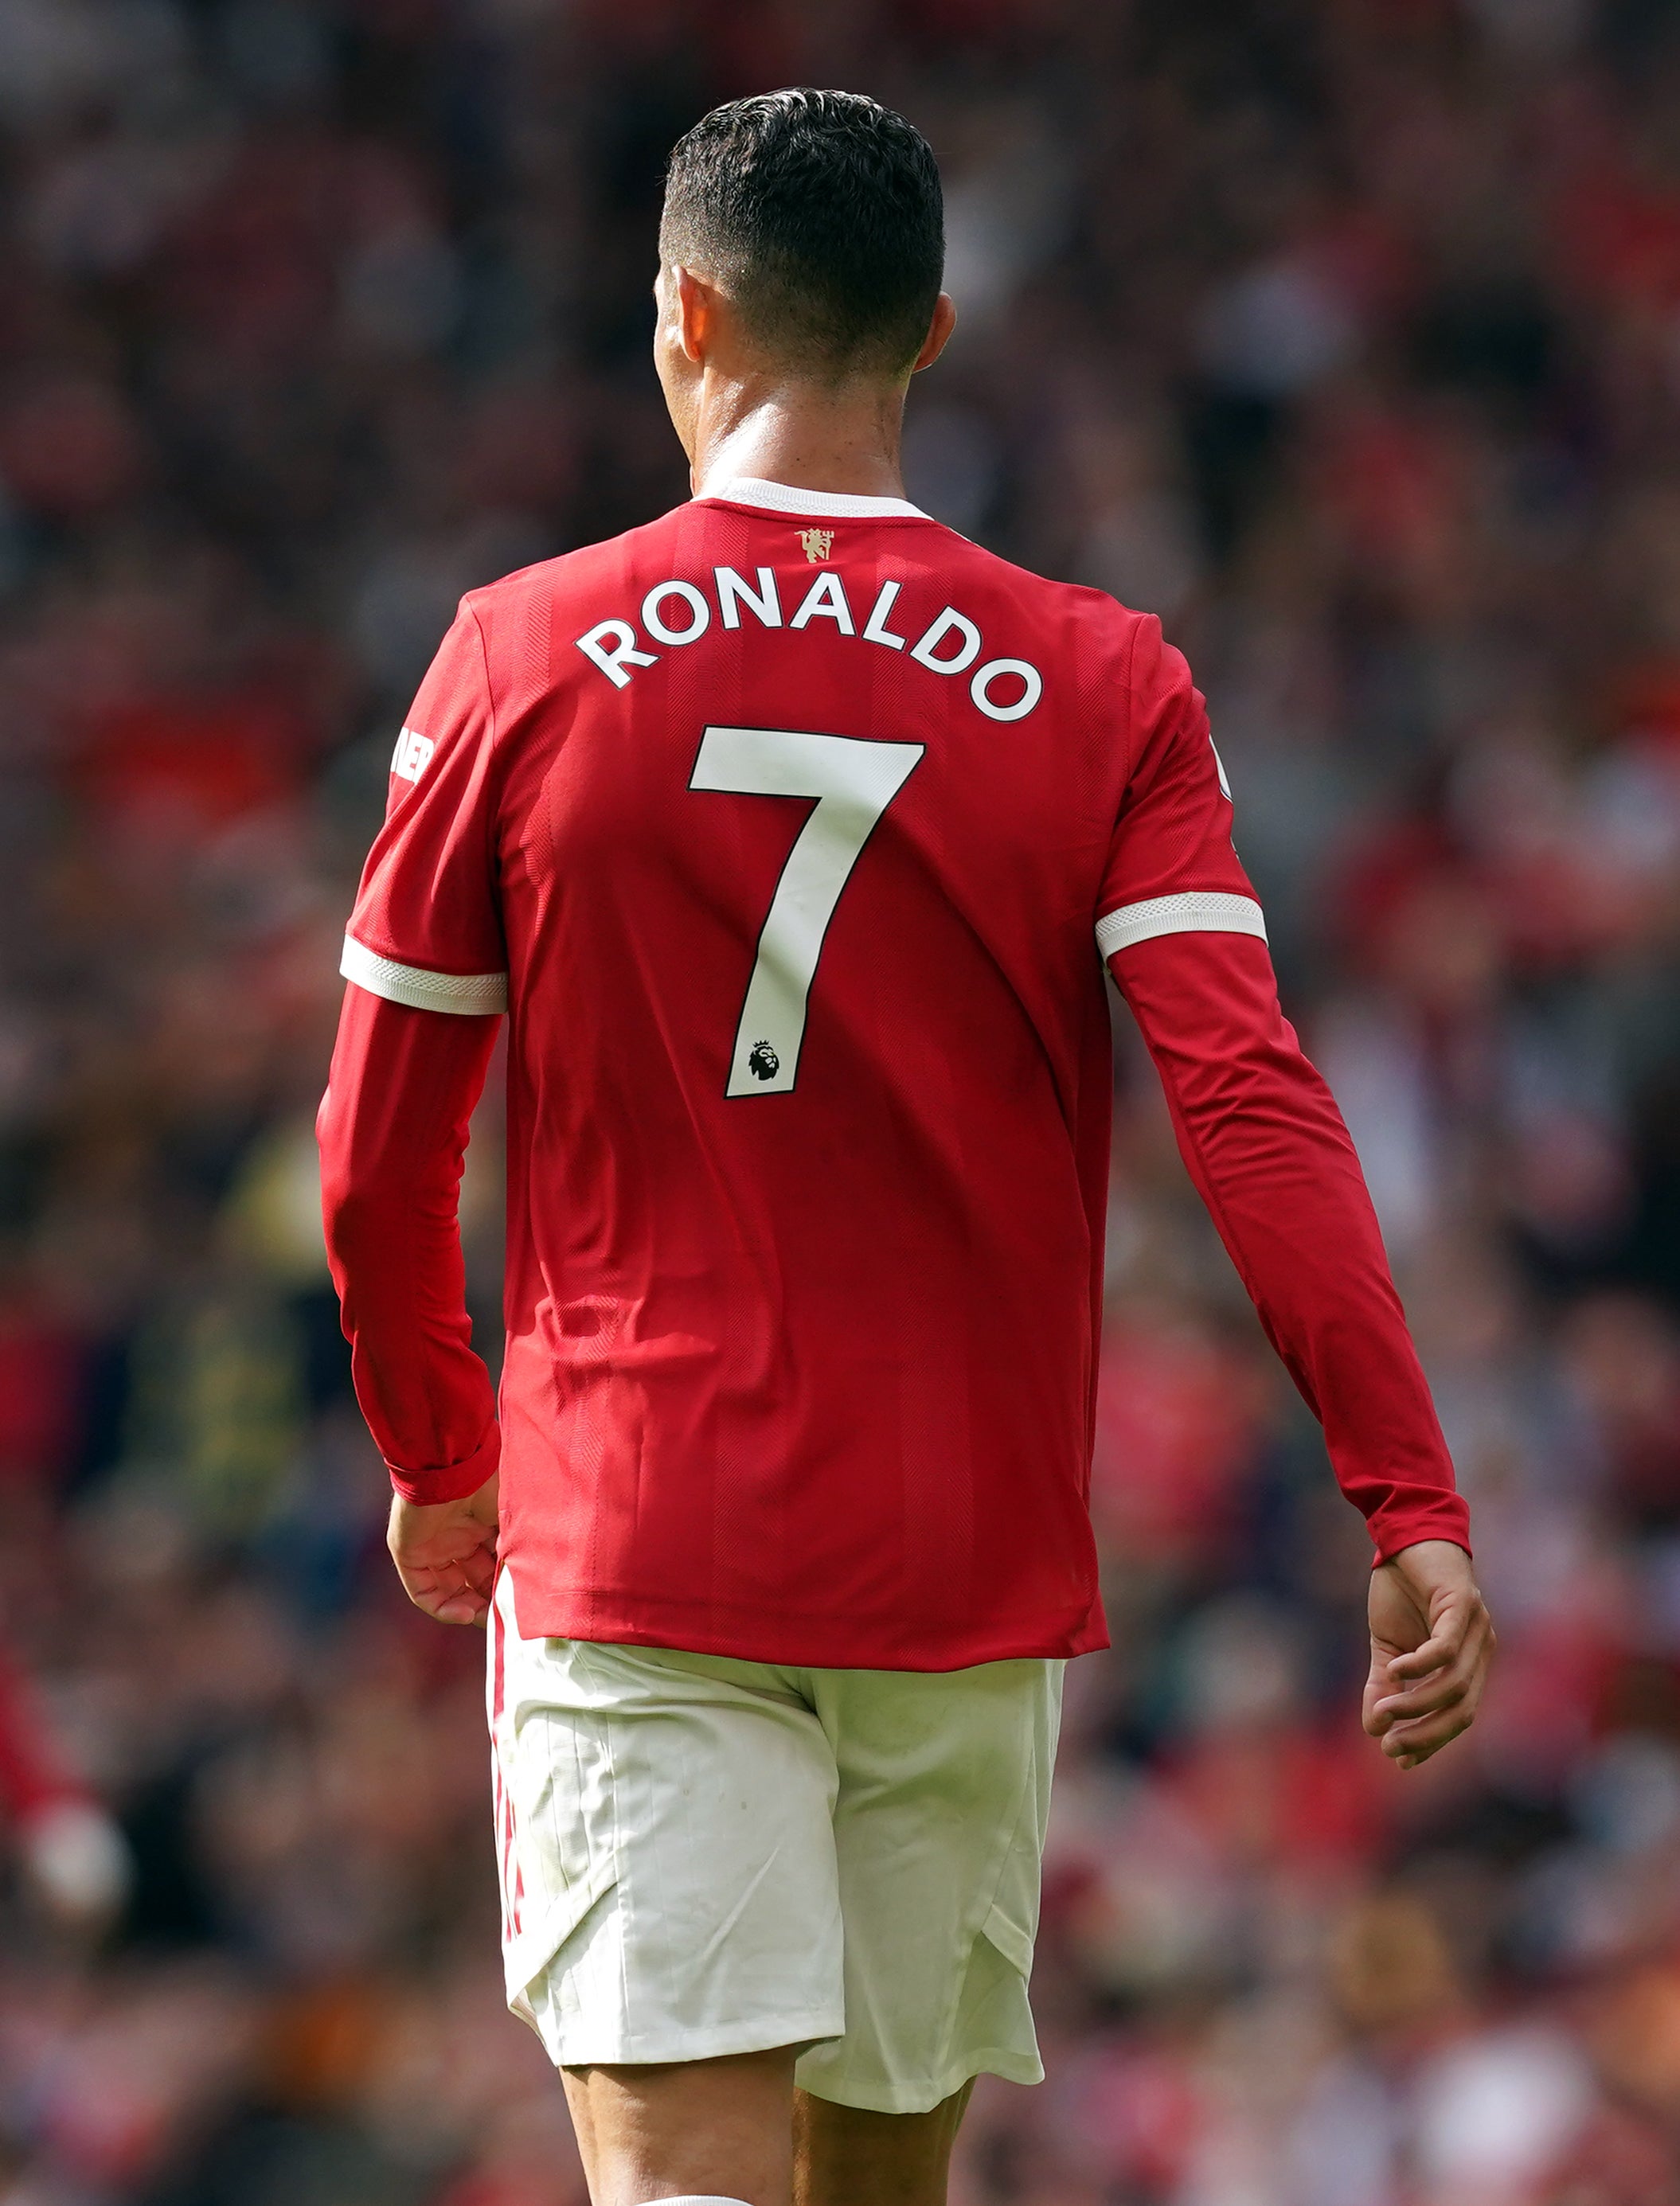 Ronaldo scored twice in his first appearance for Manchester United in 12 years (Martin Rickett/PA)